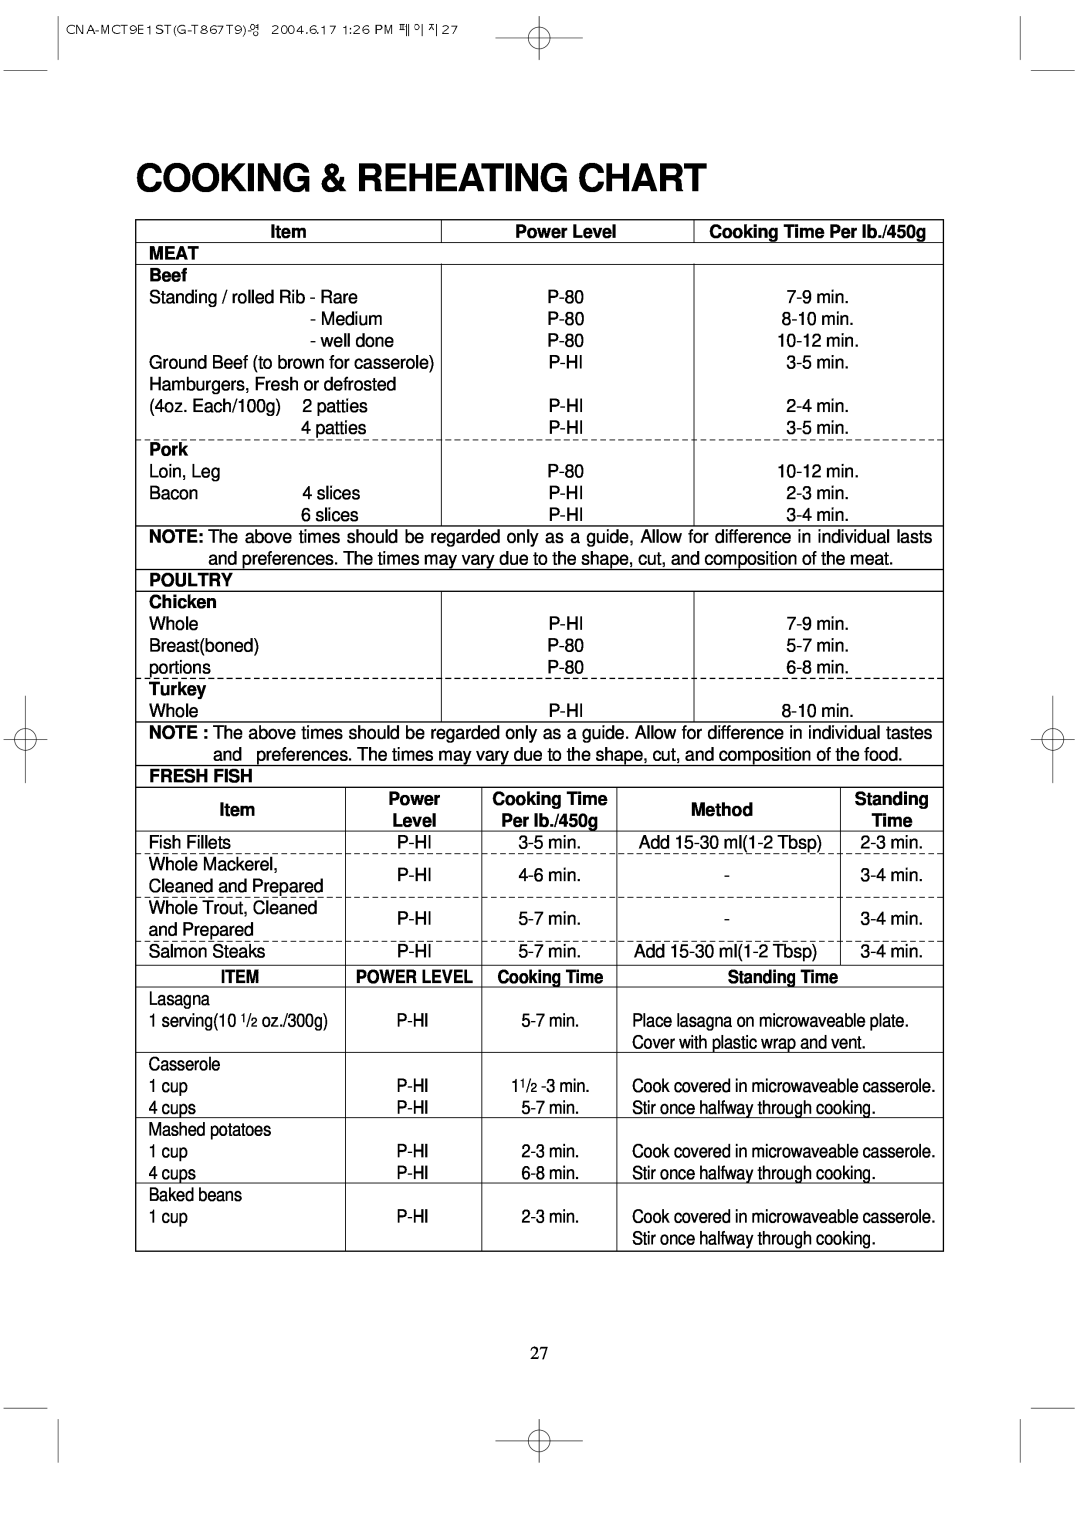 Magic Chef MCT9E1ST manual Cooking & Reheating Chart, Per lb./450g, Power Level, Cooking Time 